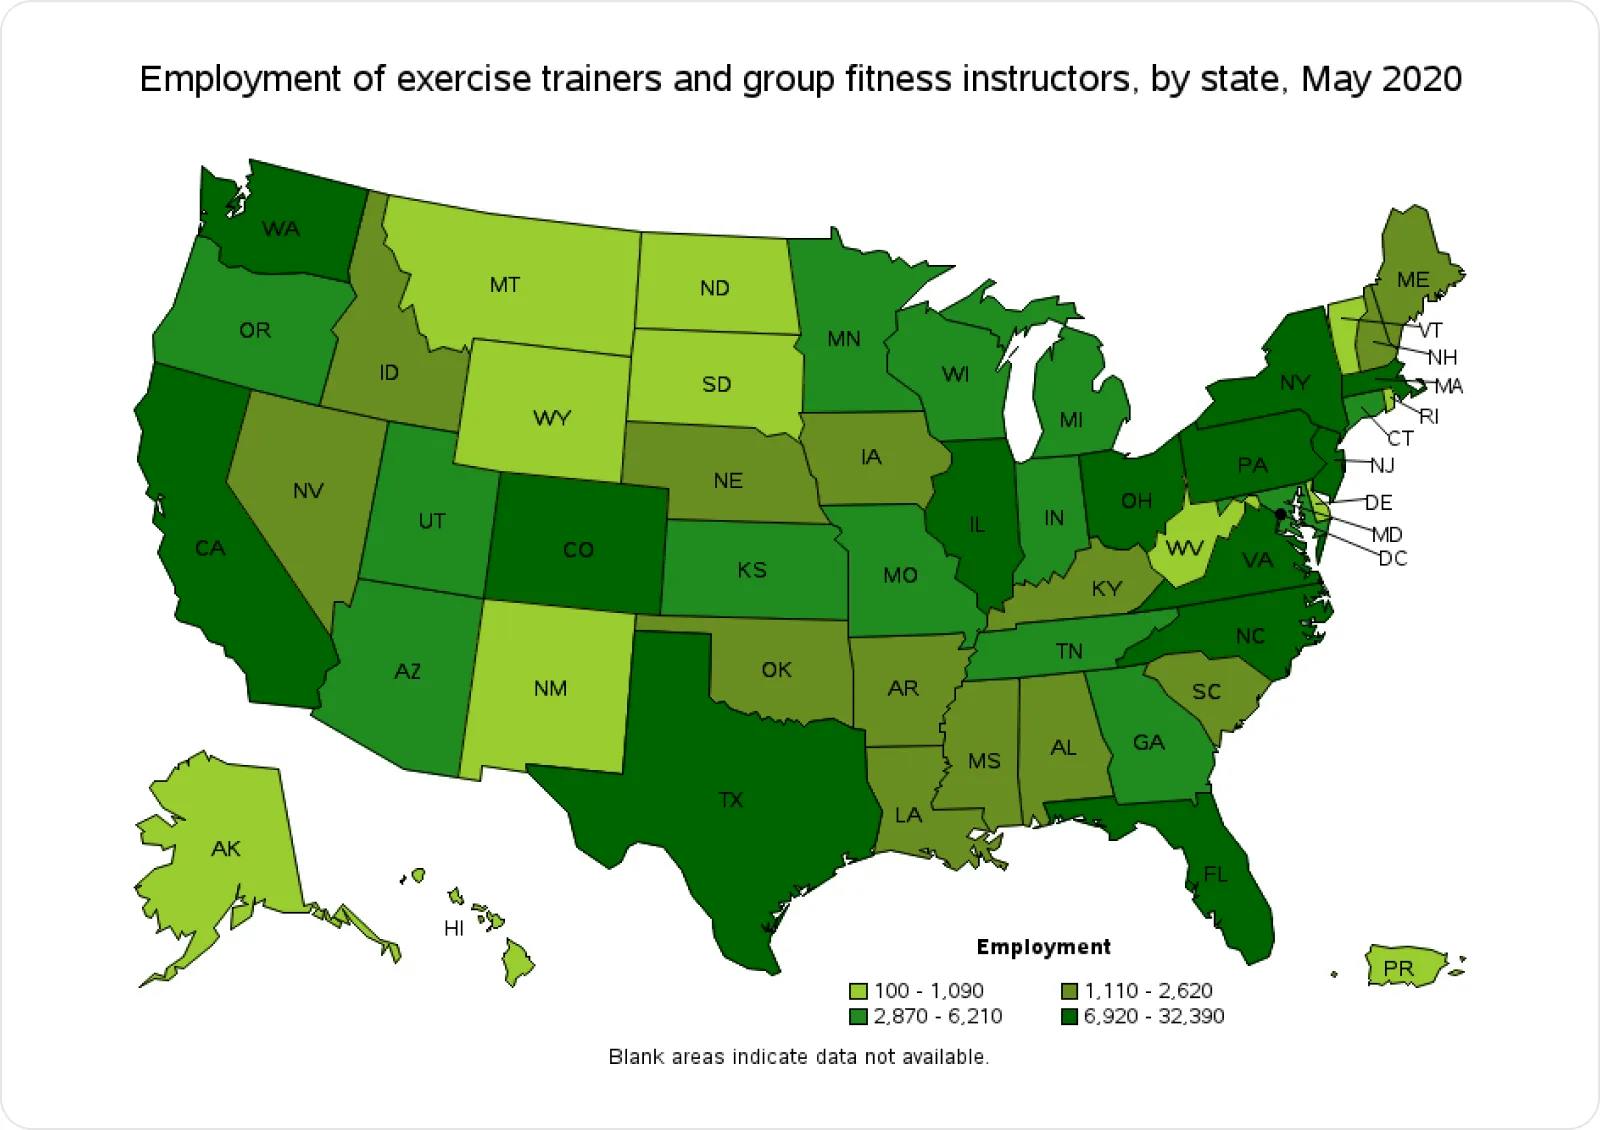 Employment of exercise trainers and group fitness instructors